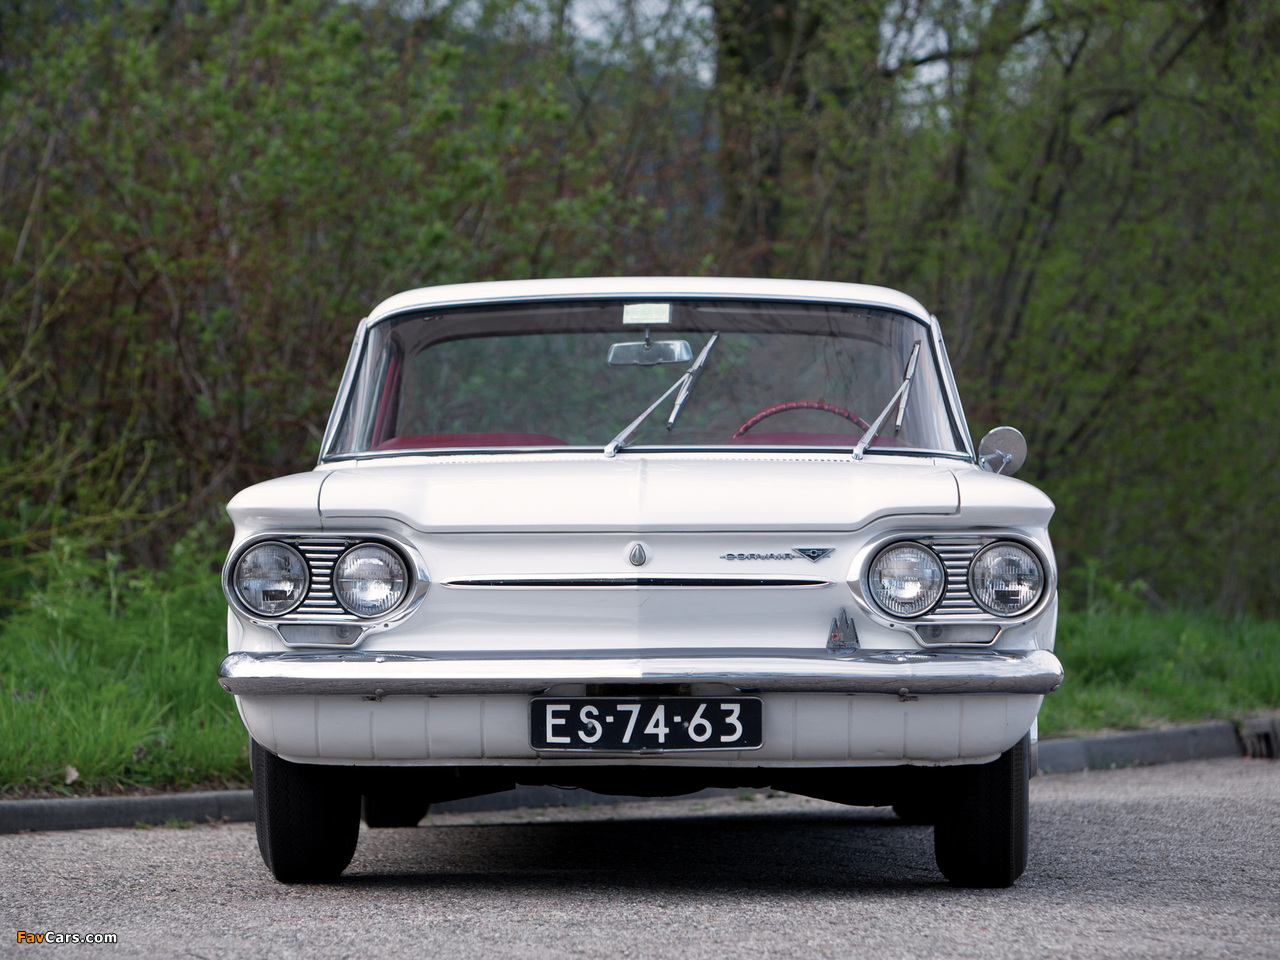 Images of Chevrolet Corvair Monza 900 Club Coupe (09-27) 1963 (1280 x 960)